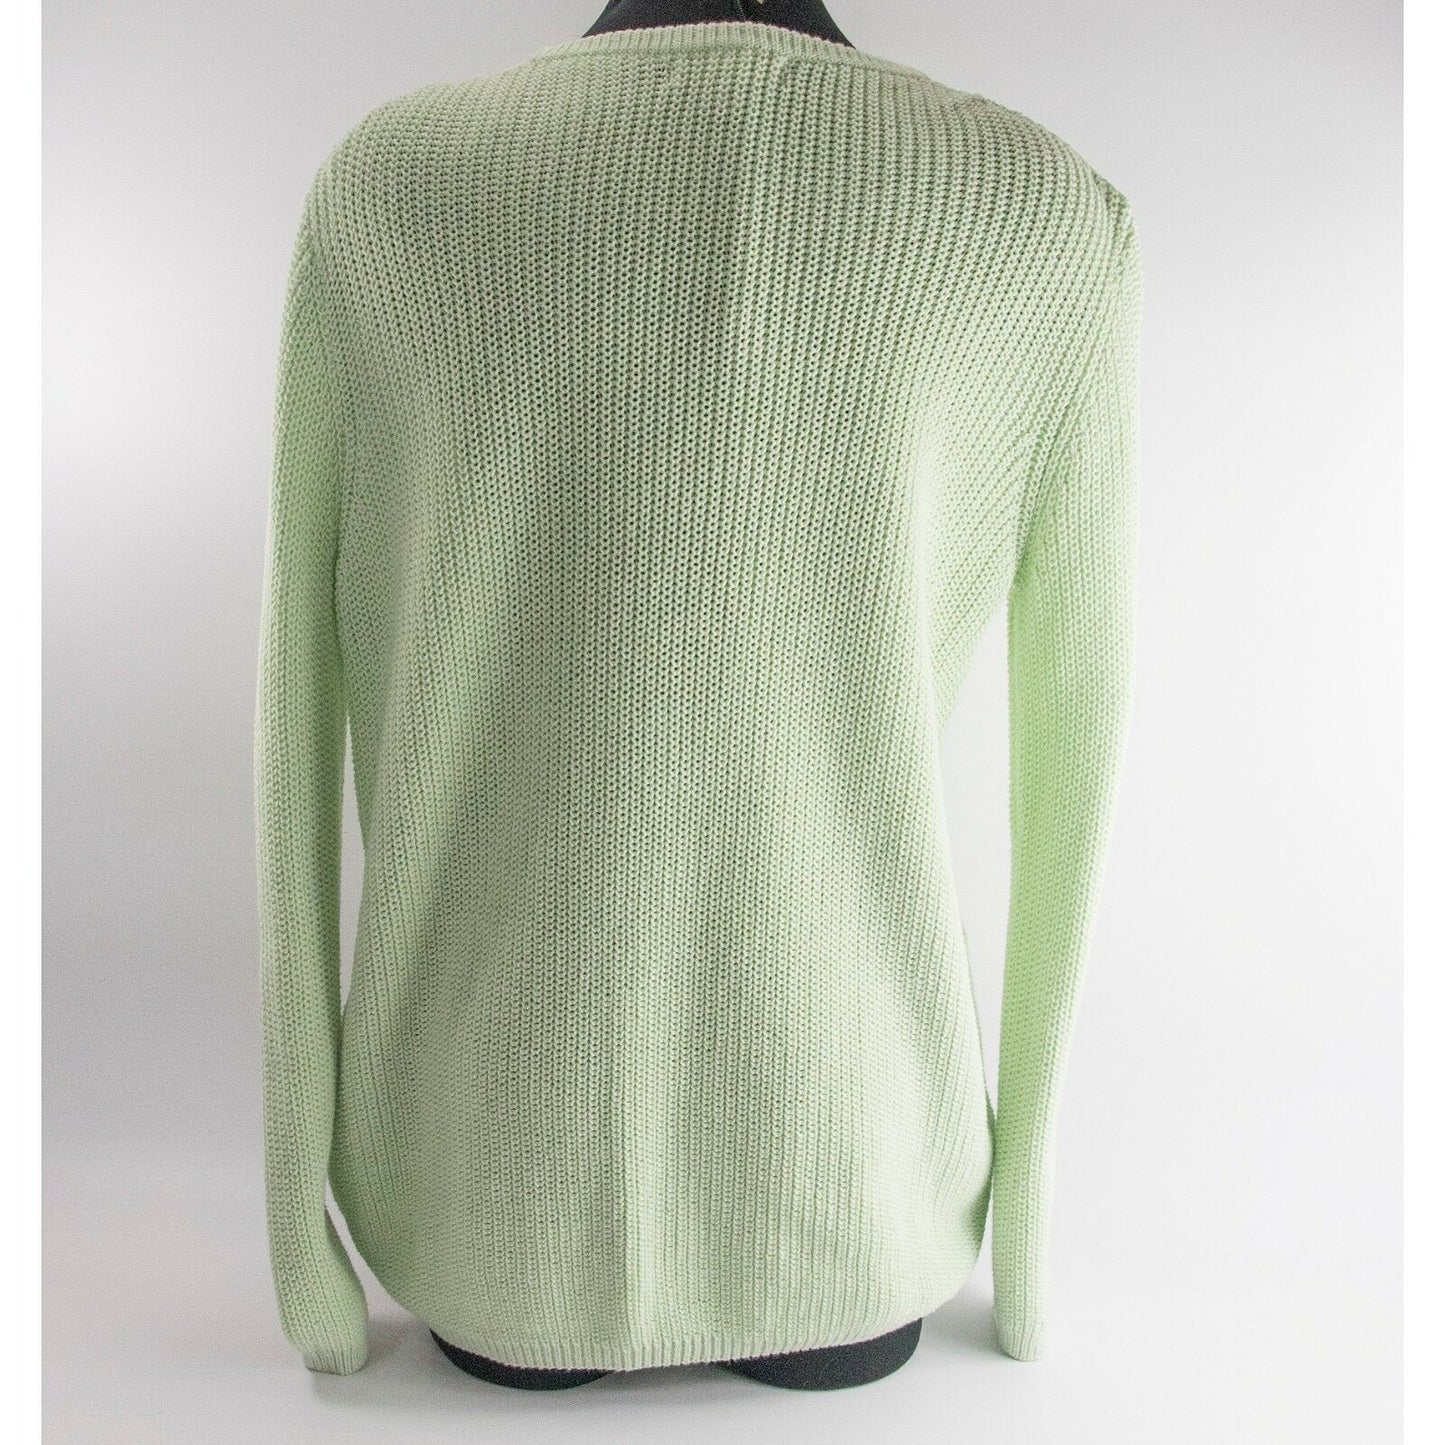 Banana Republic Pale Lime Green Chunky Cable Knit Oversize Sweater M